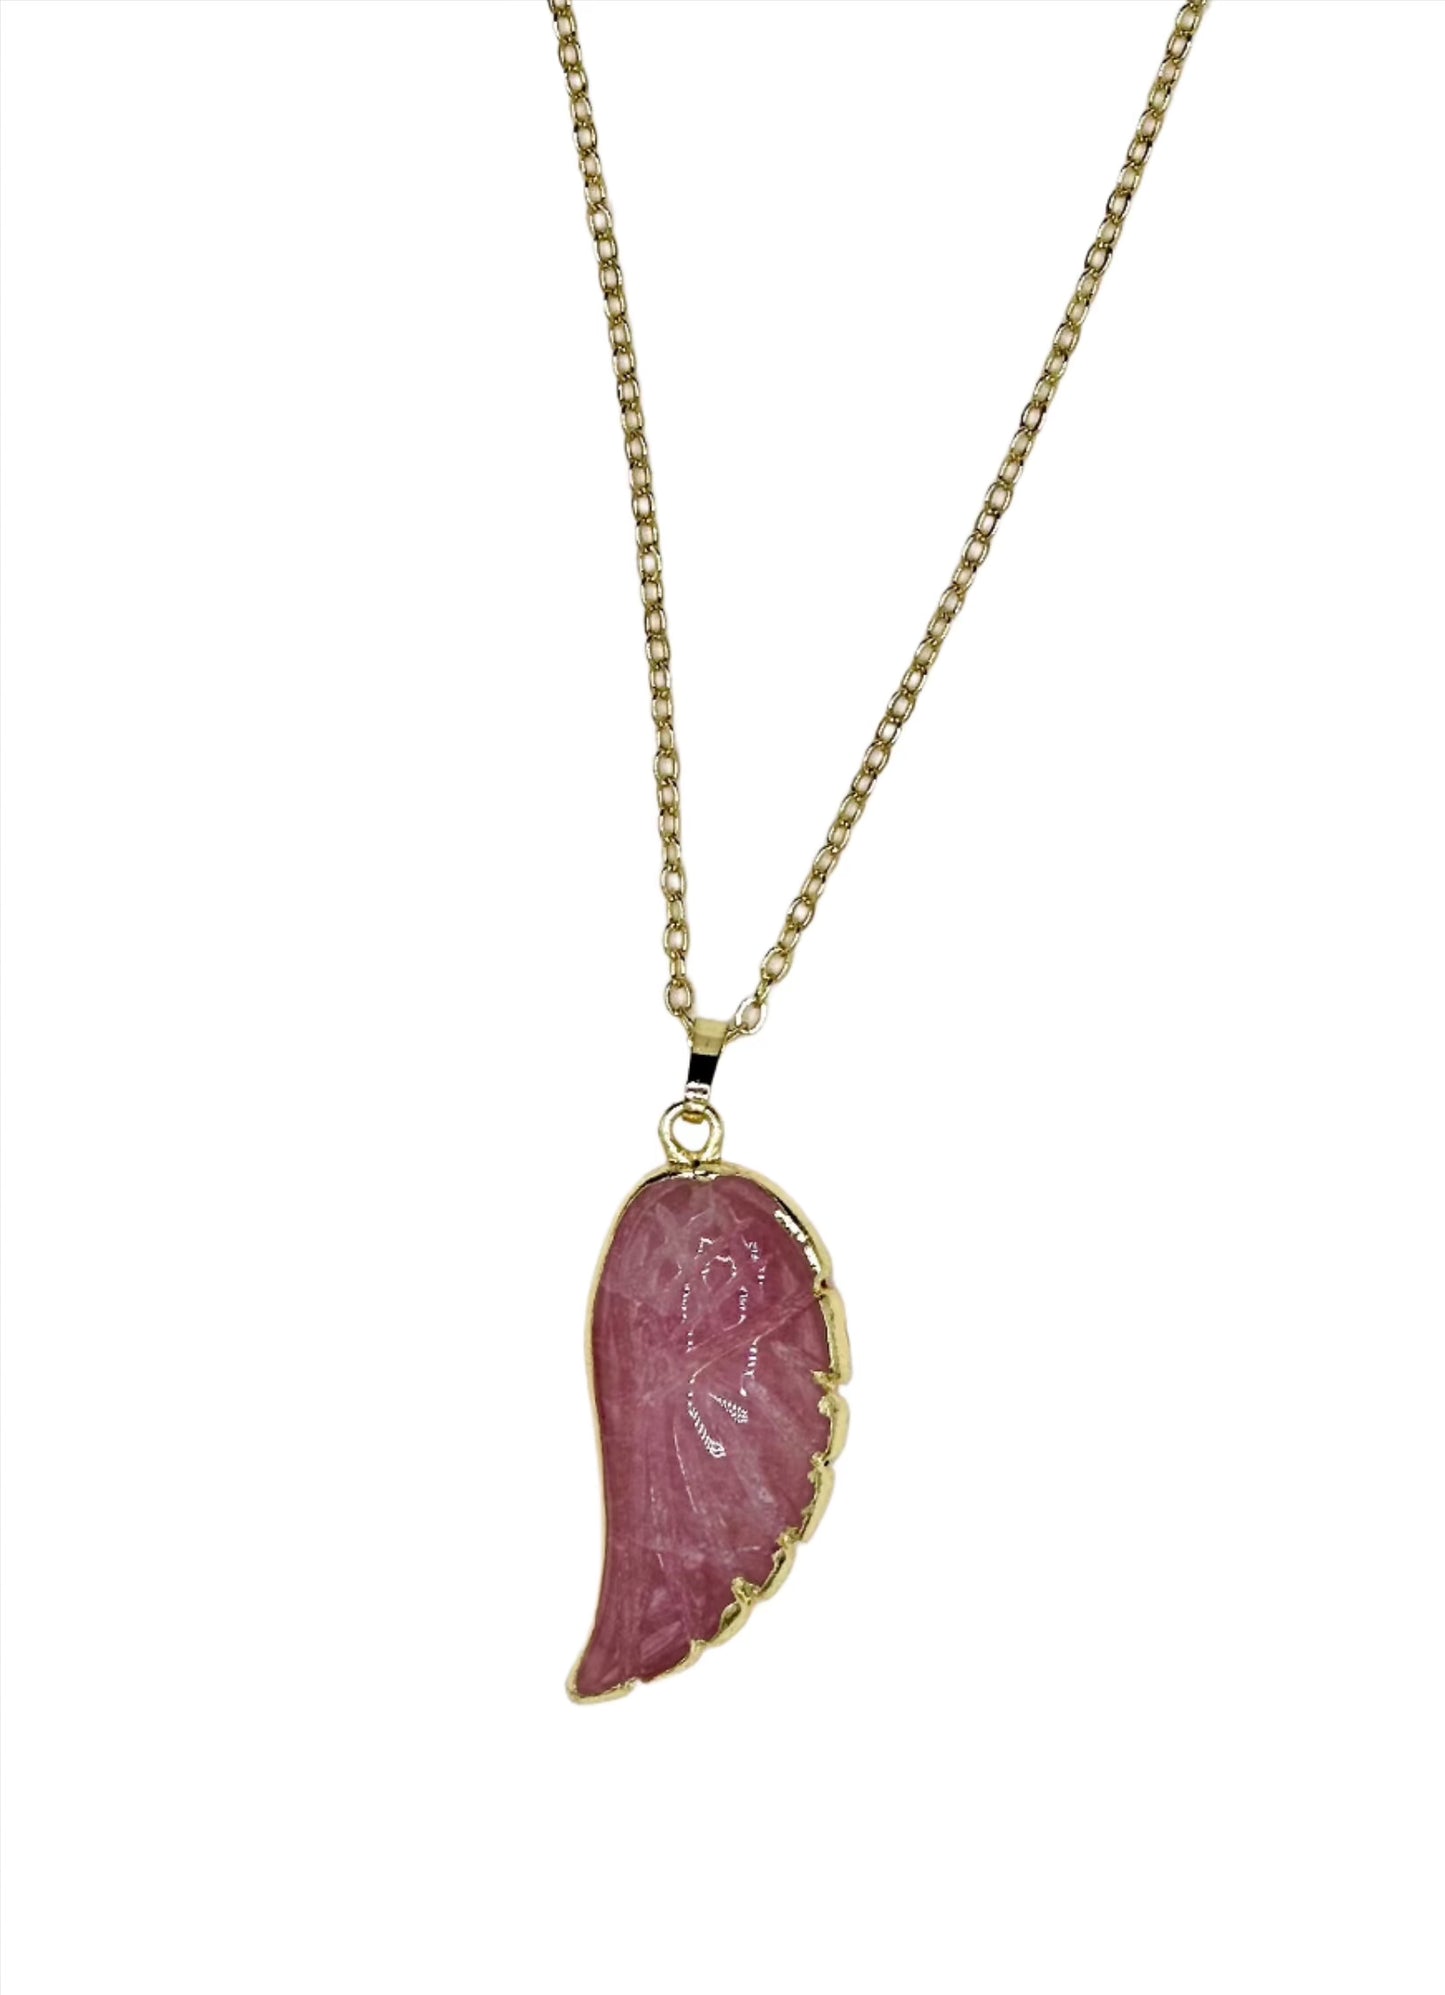 Rose Quartz Angel Wing Necklace - Gold Plated for Protection and Courage